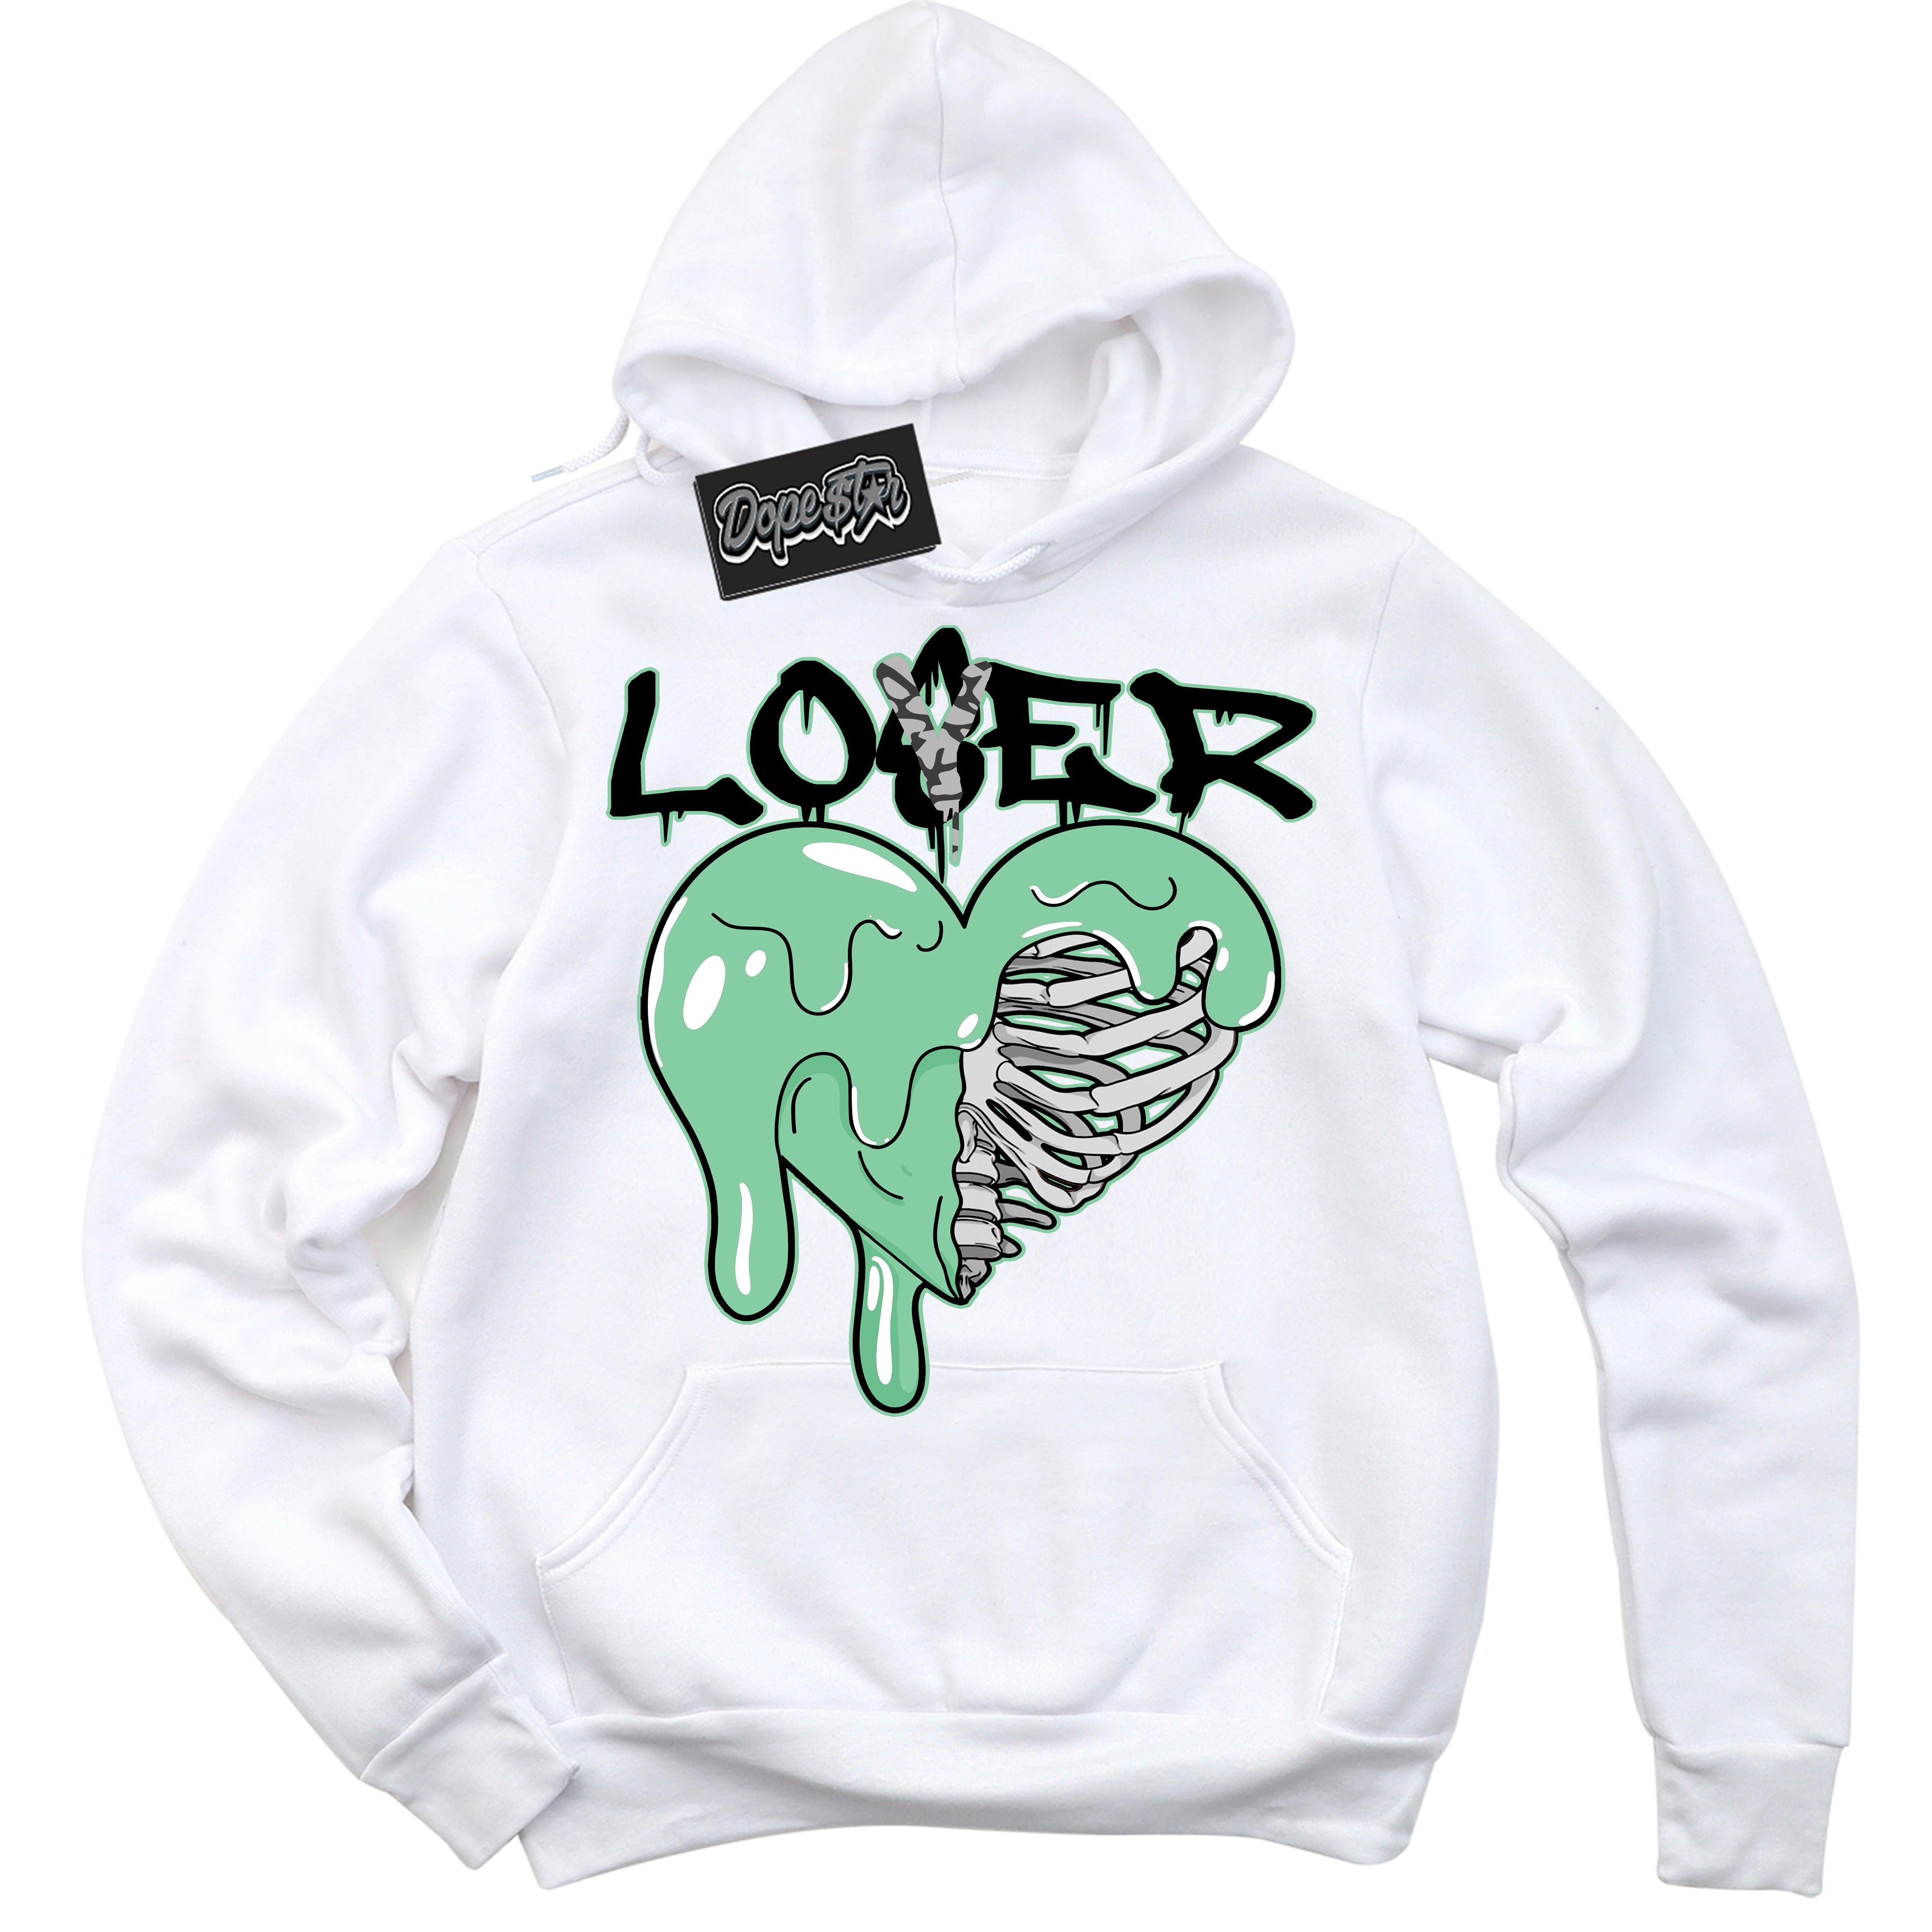 Cool White Graphic DopeStar Hoodie with “ Lover Loser Heart “ print, that perfectly matches Green Glow 3s sneakers